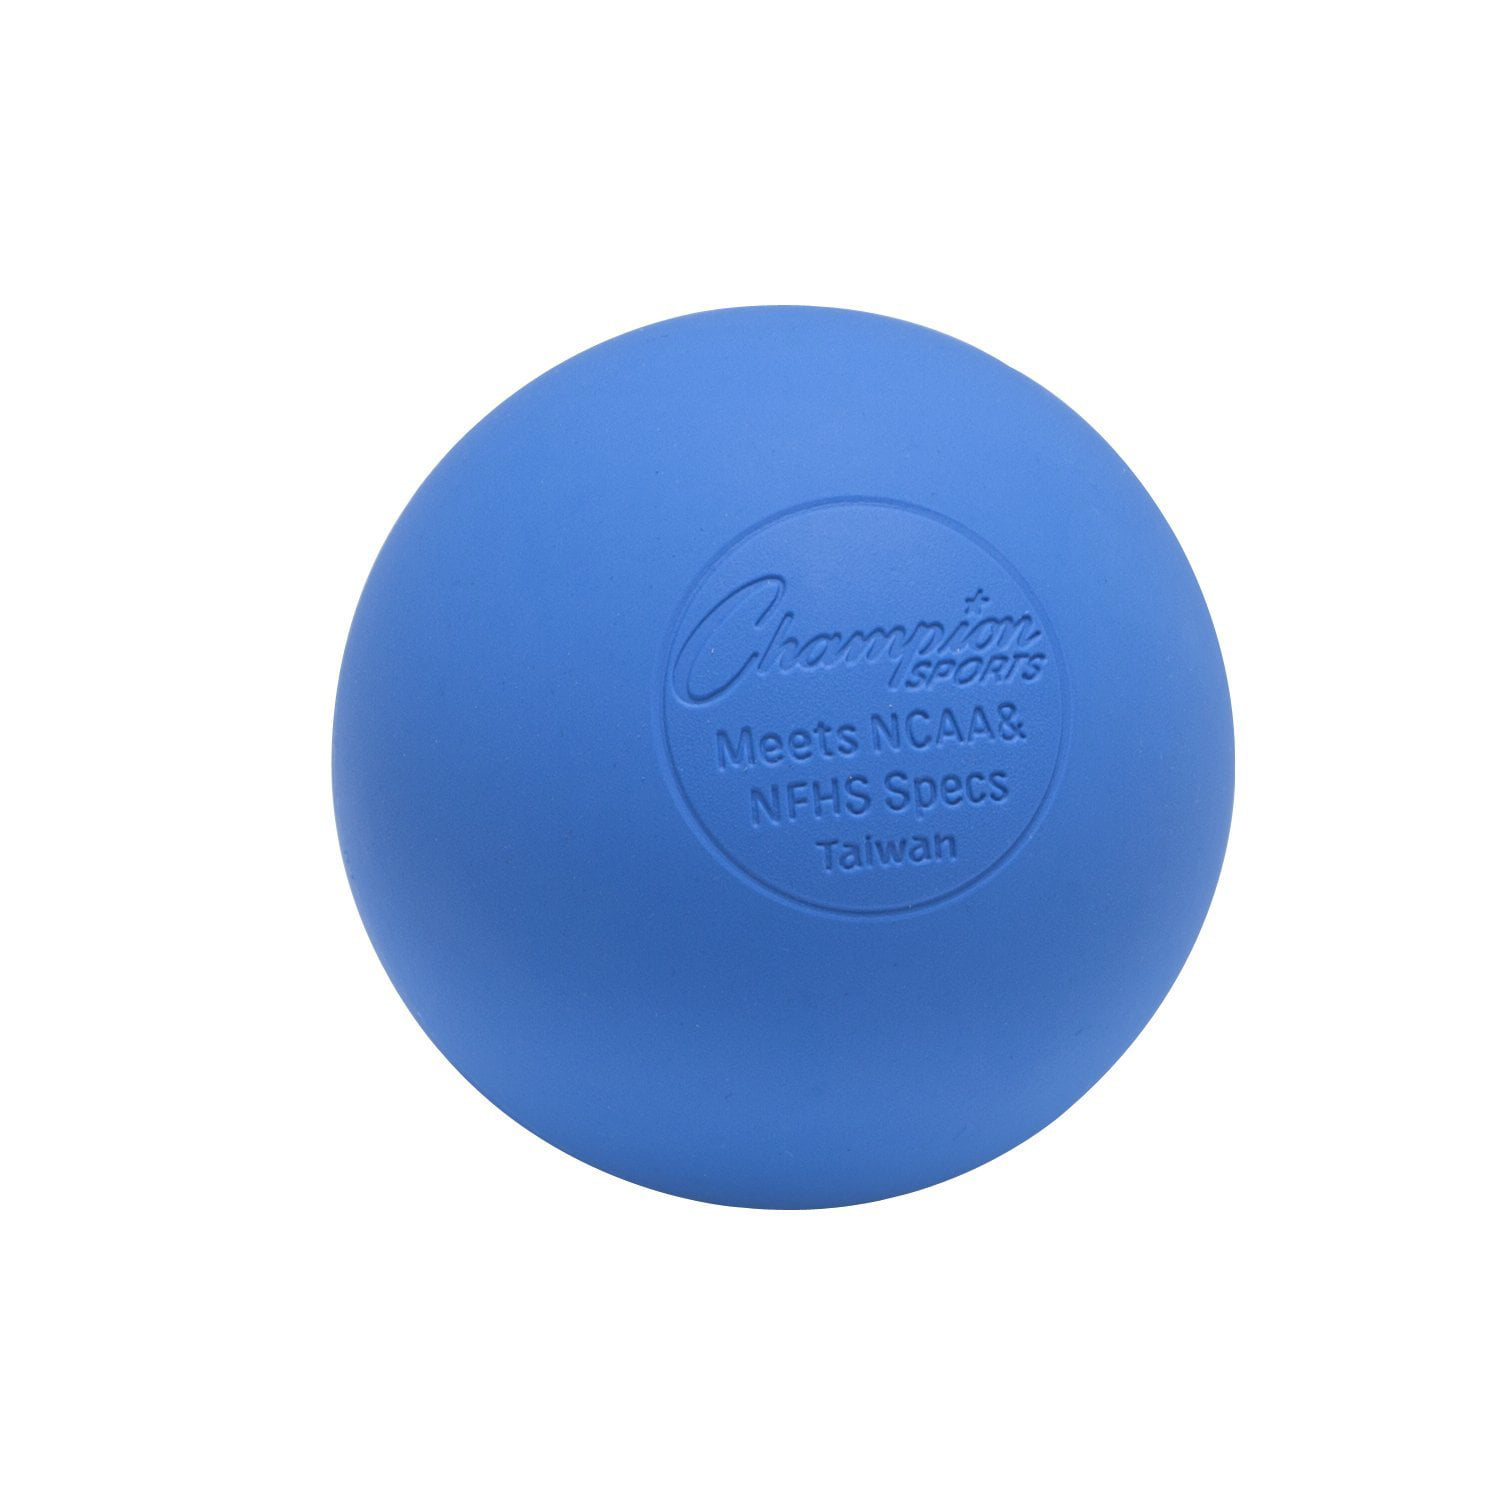 x1 Champion Lacrosse Ball Official NFHS NCAA Mobility Massage Therapy-BLUE 